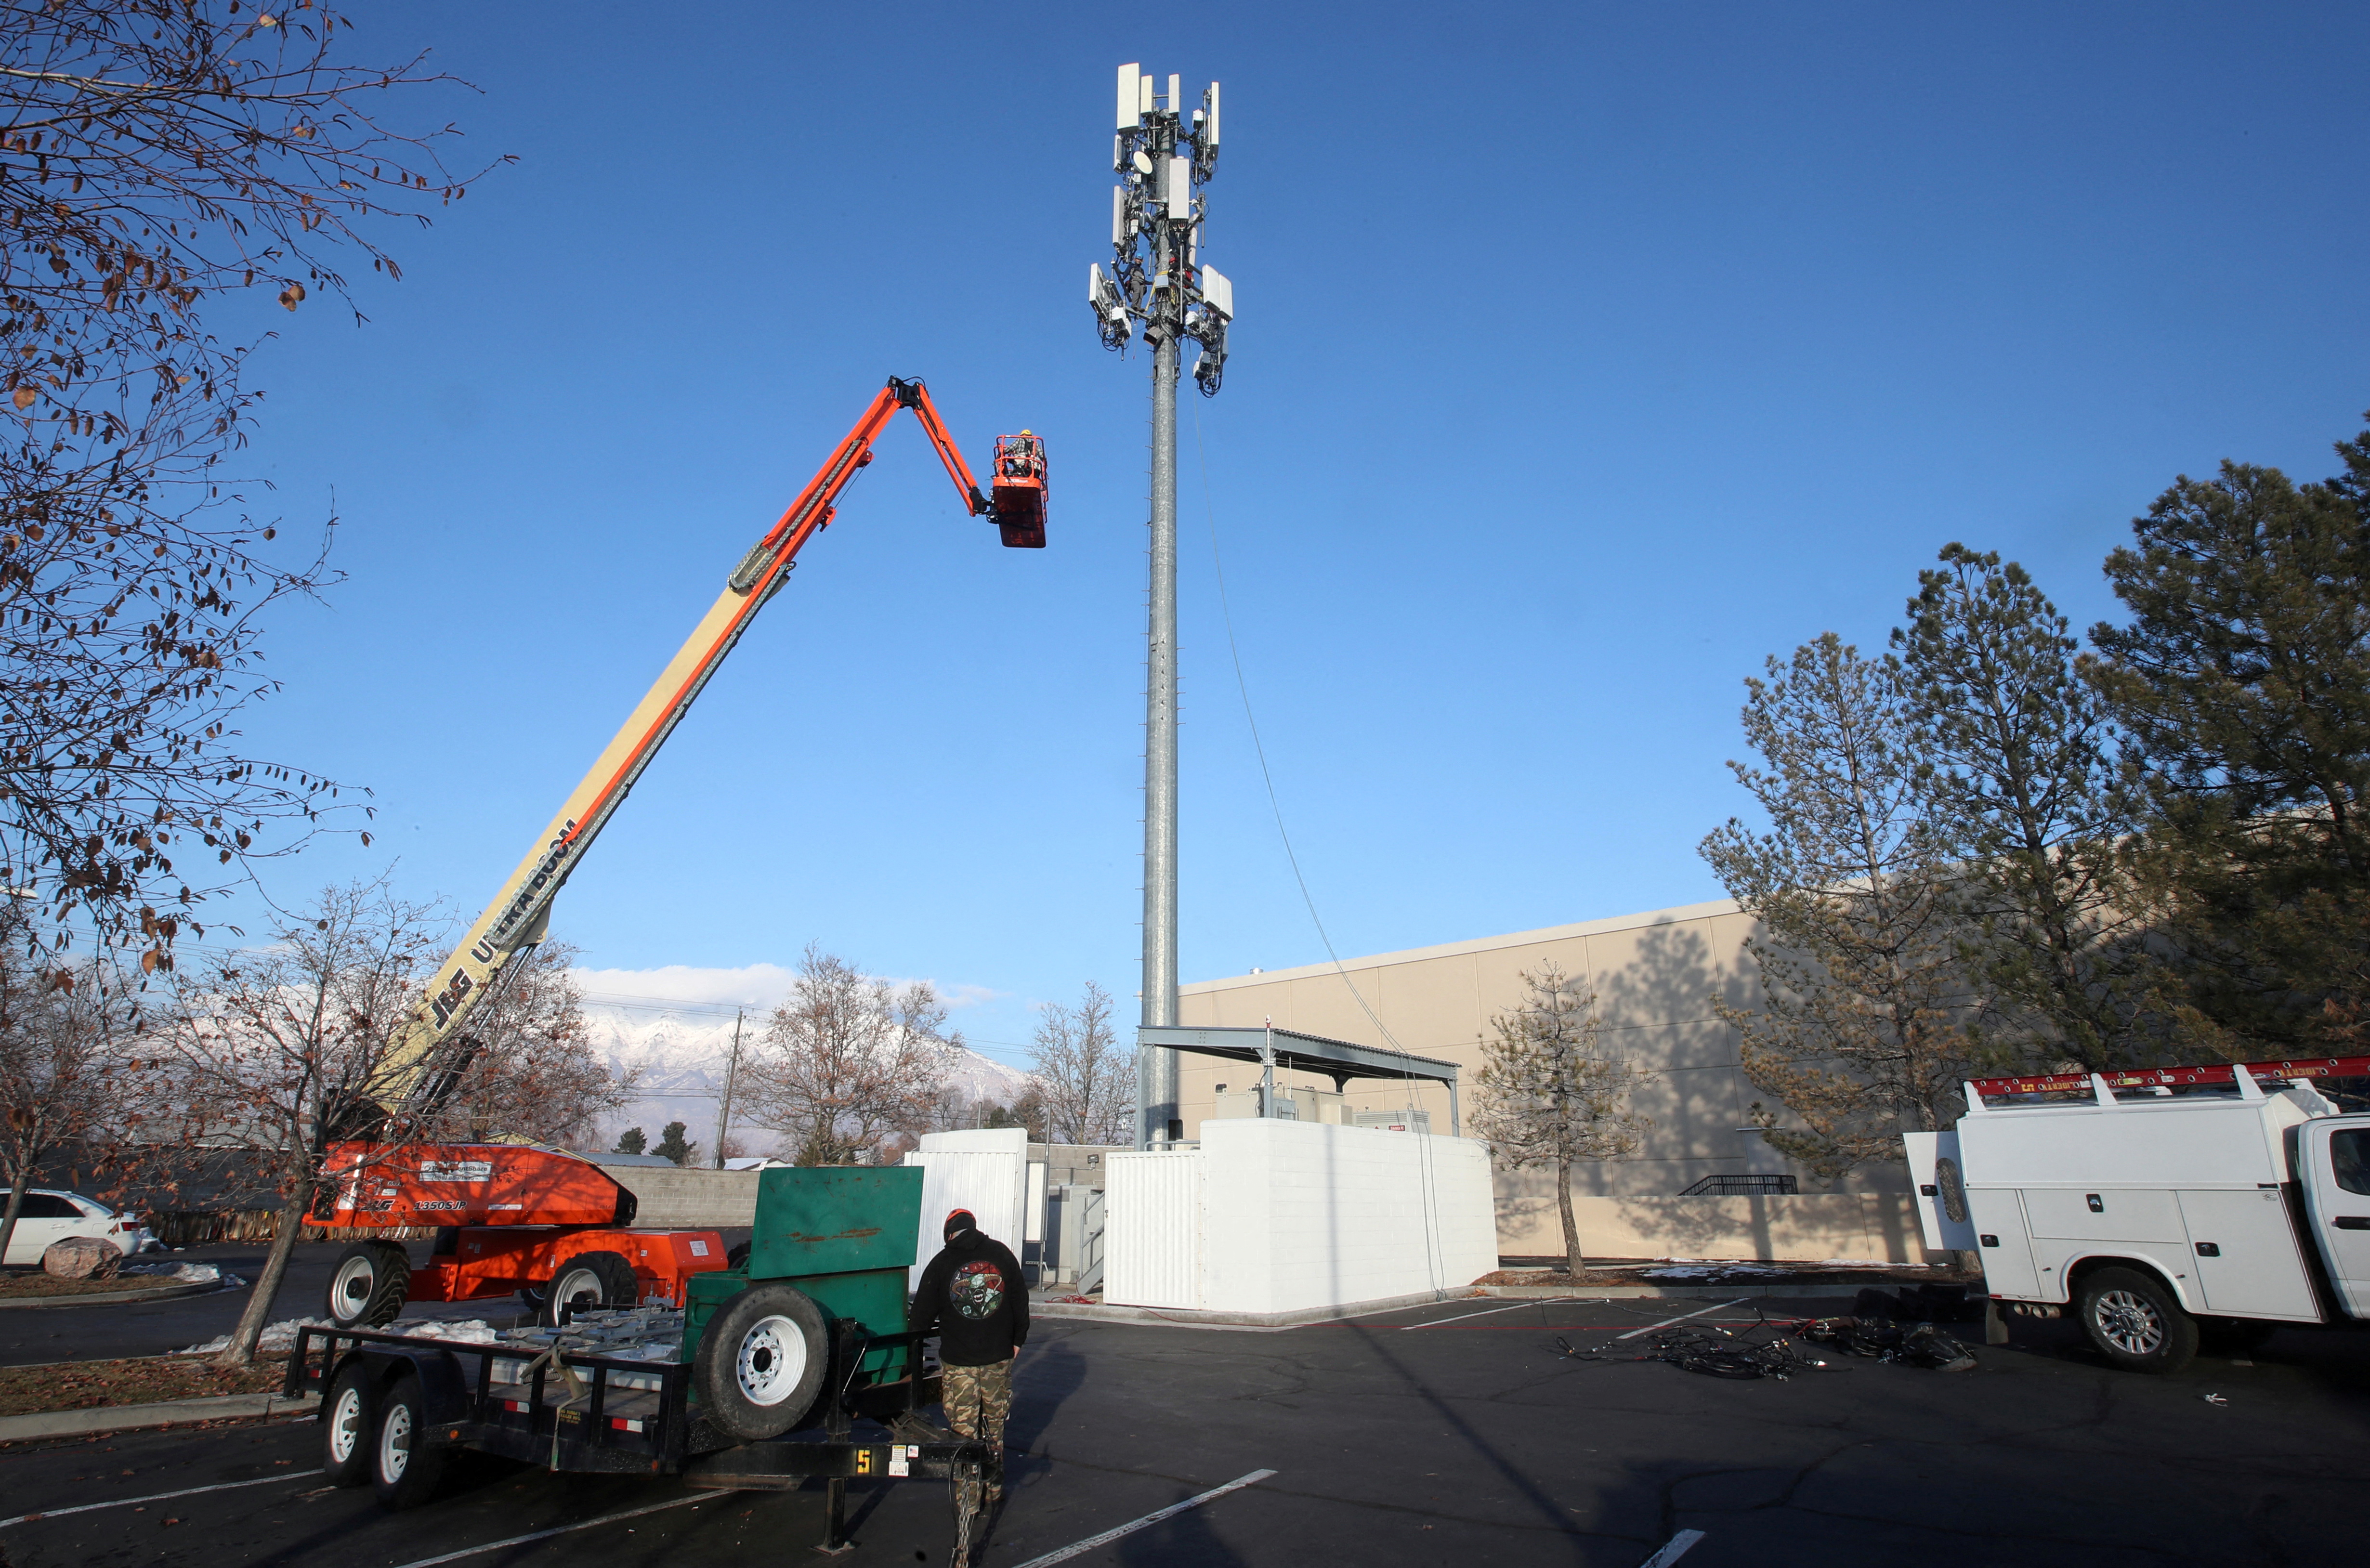 A contract crew from Verizon installs 5G telecommunications equipment on a tower in Orem, Utah, U.S. December 3, 2019. REUTERS/George Frey/File Photo